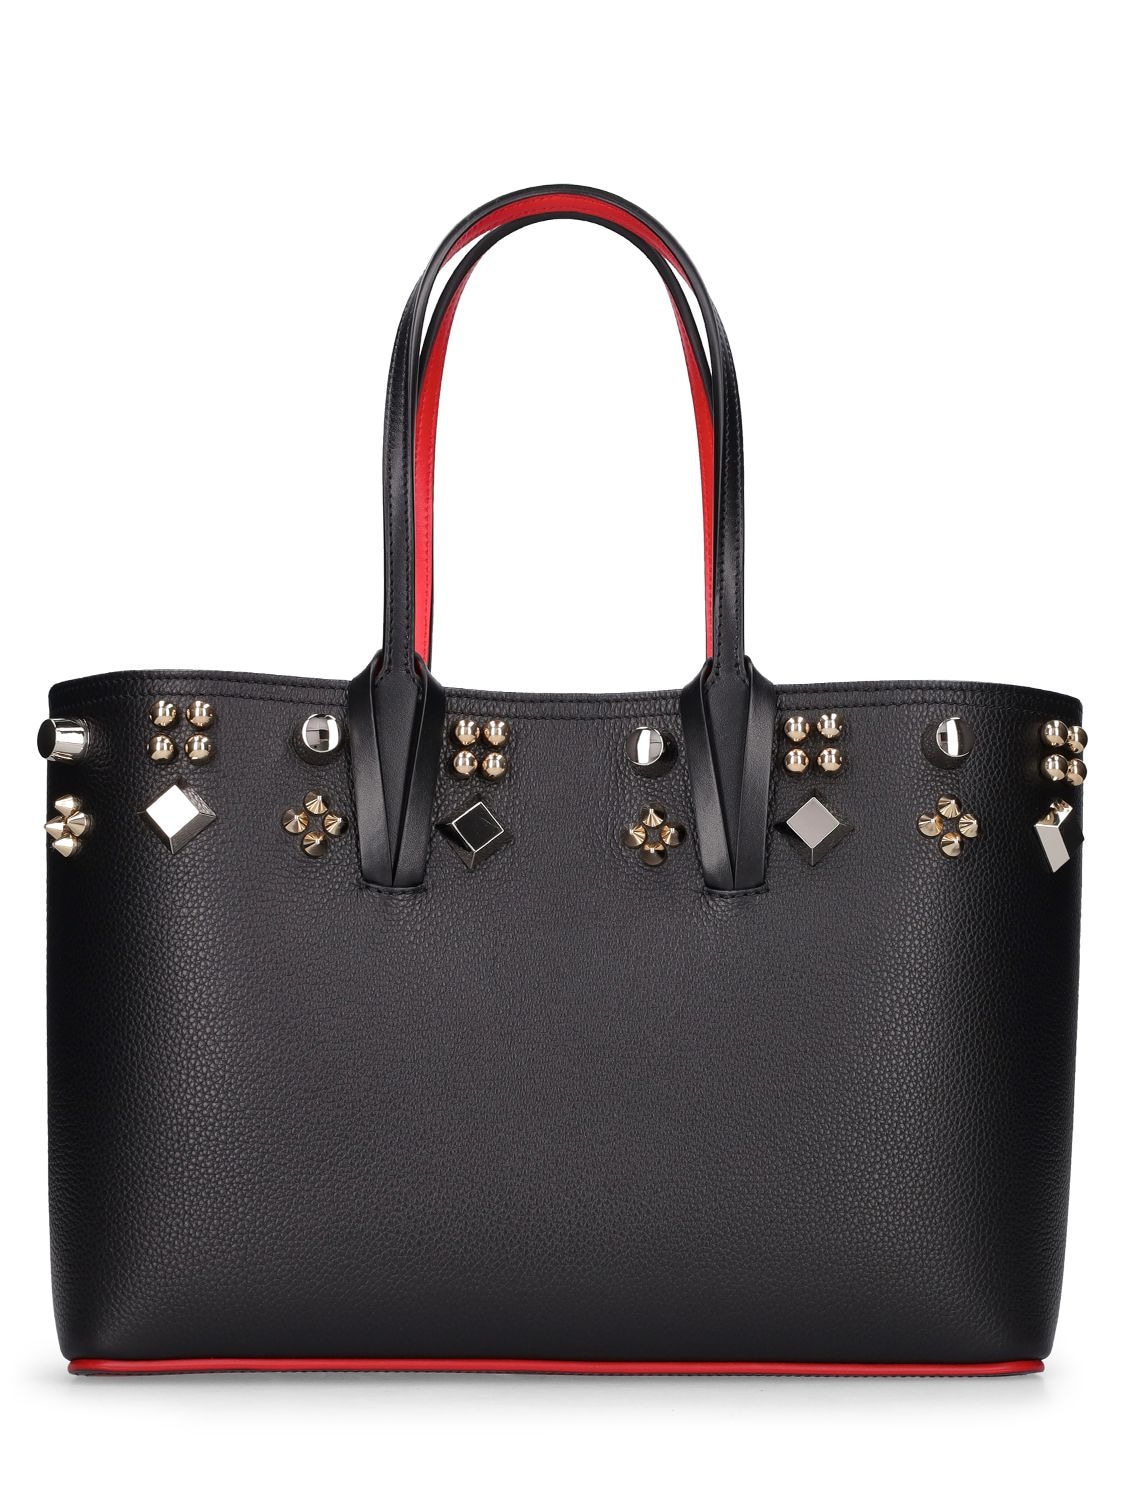 Shop Christian Louboutin Small Cabata Spiked Leather Tote Bag In Black,multi